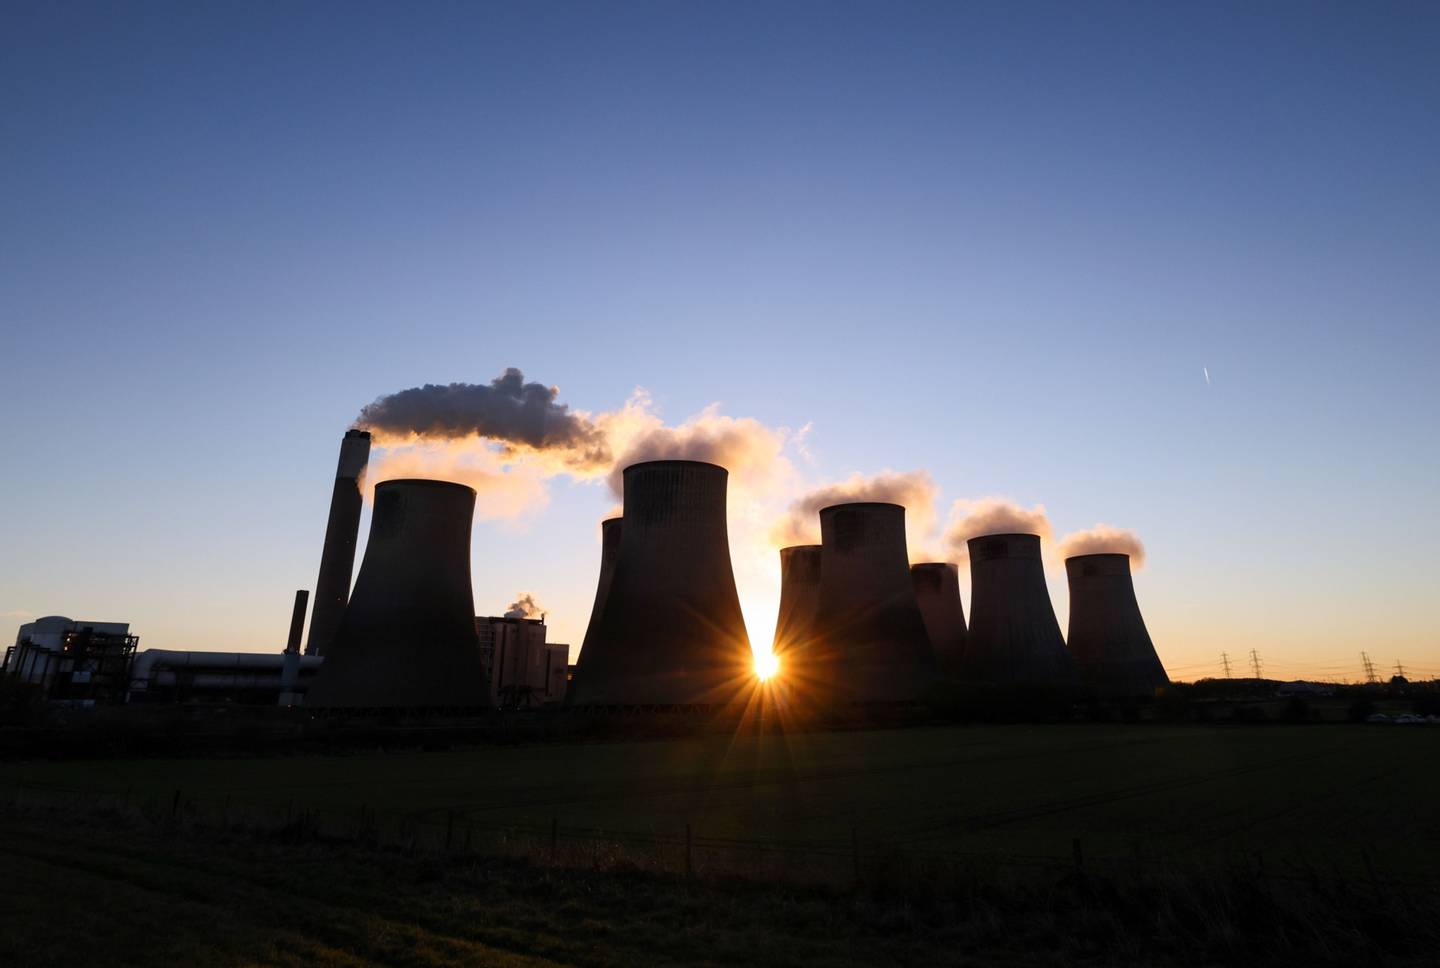 Cooling towers at Uniper SE's coal-fired power station in Ratcliffe-on-Soar, U.K., on Thursday, Dec. 2, 2021.